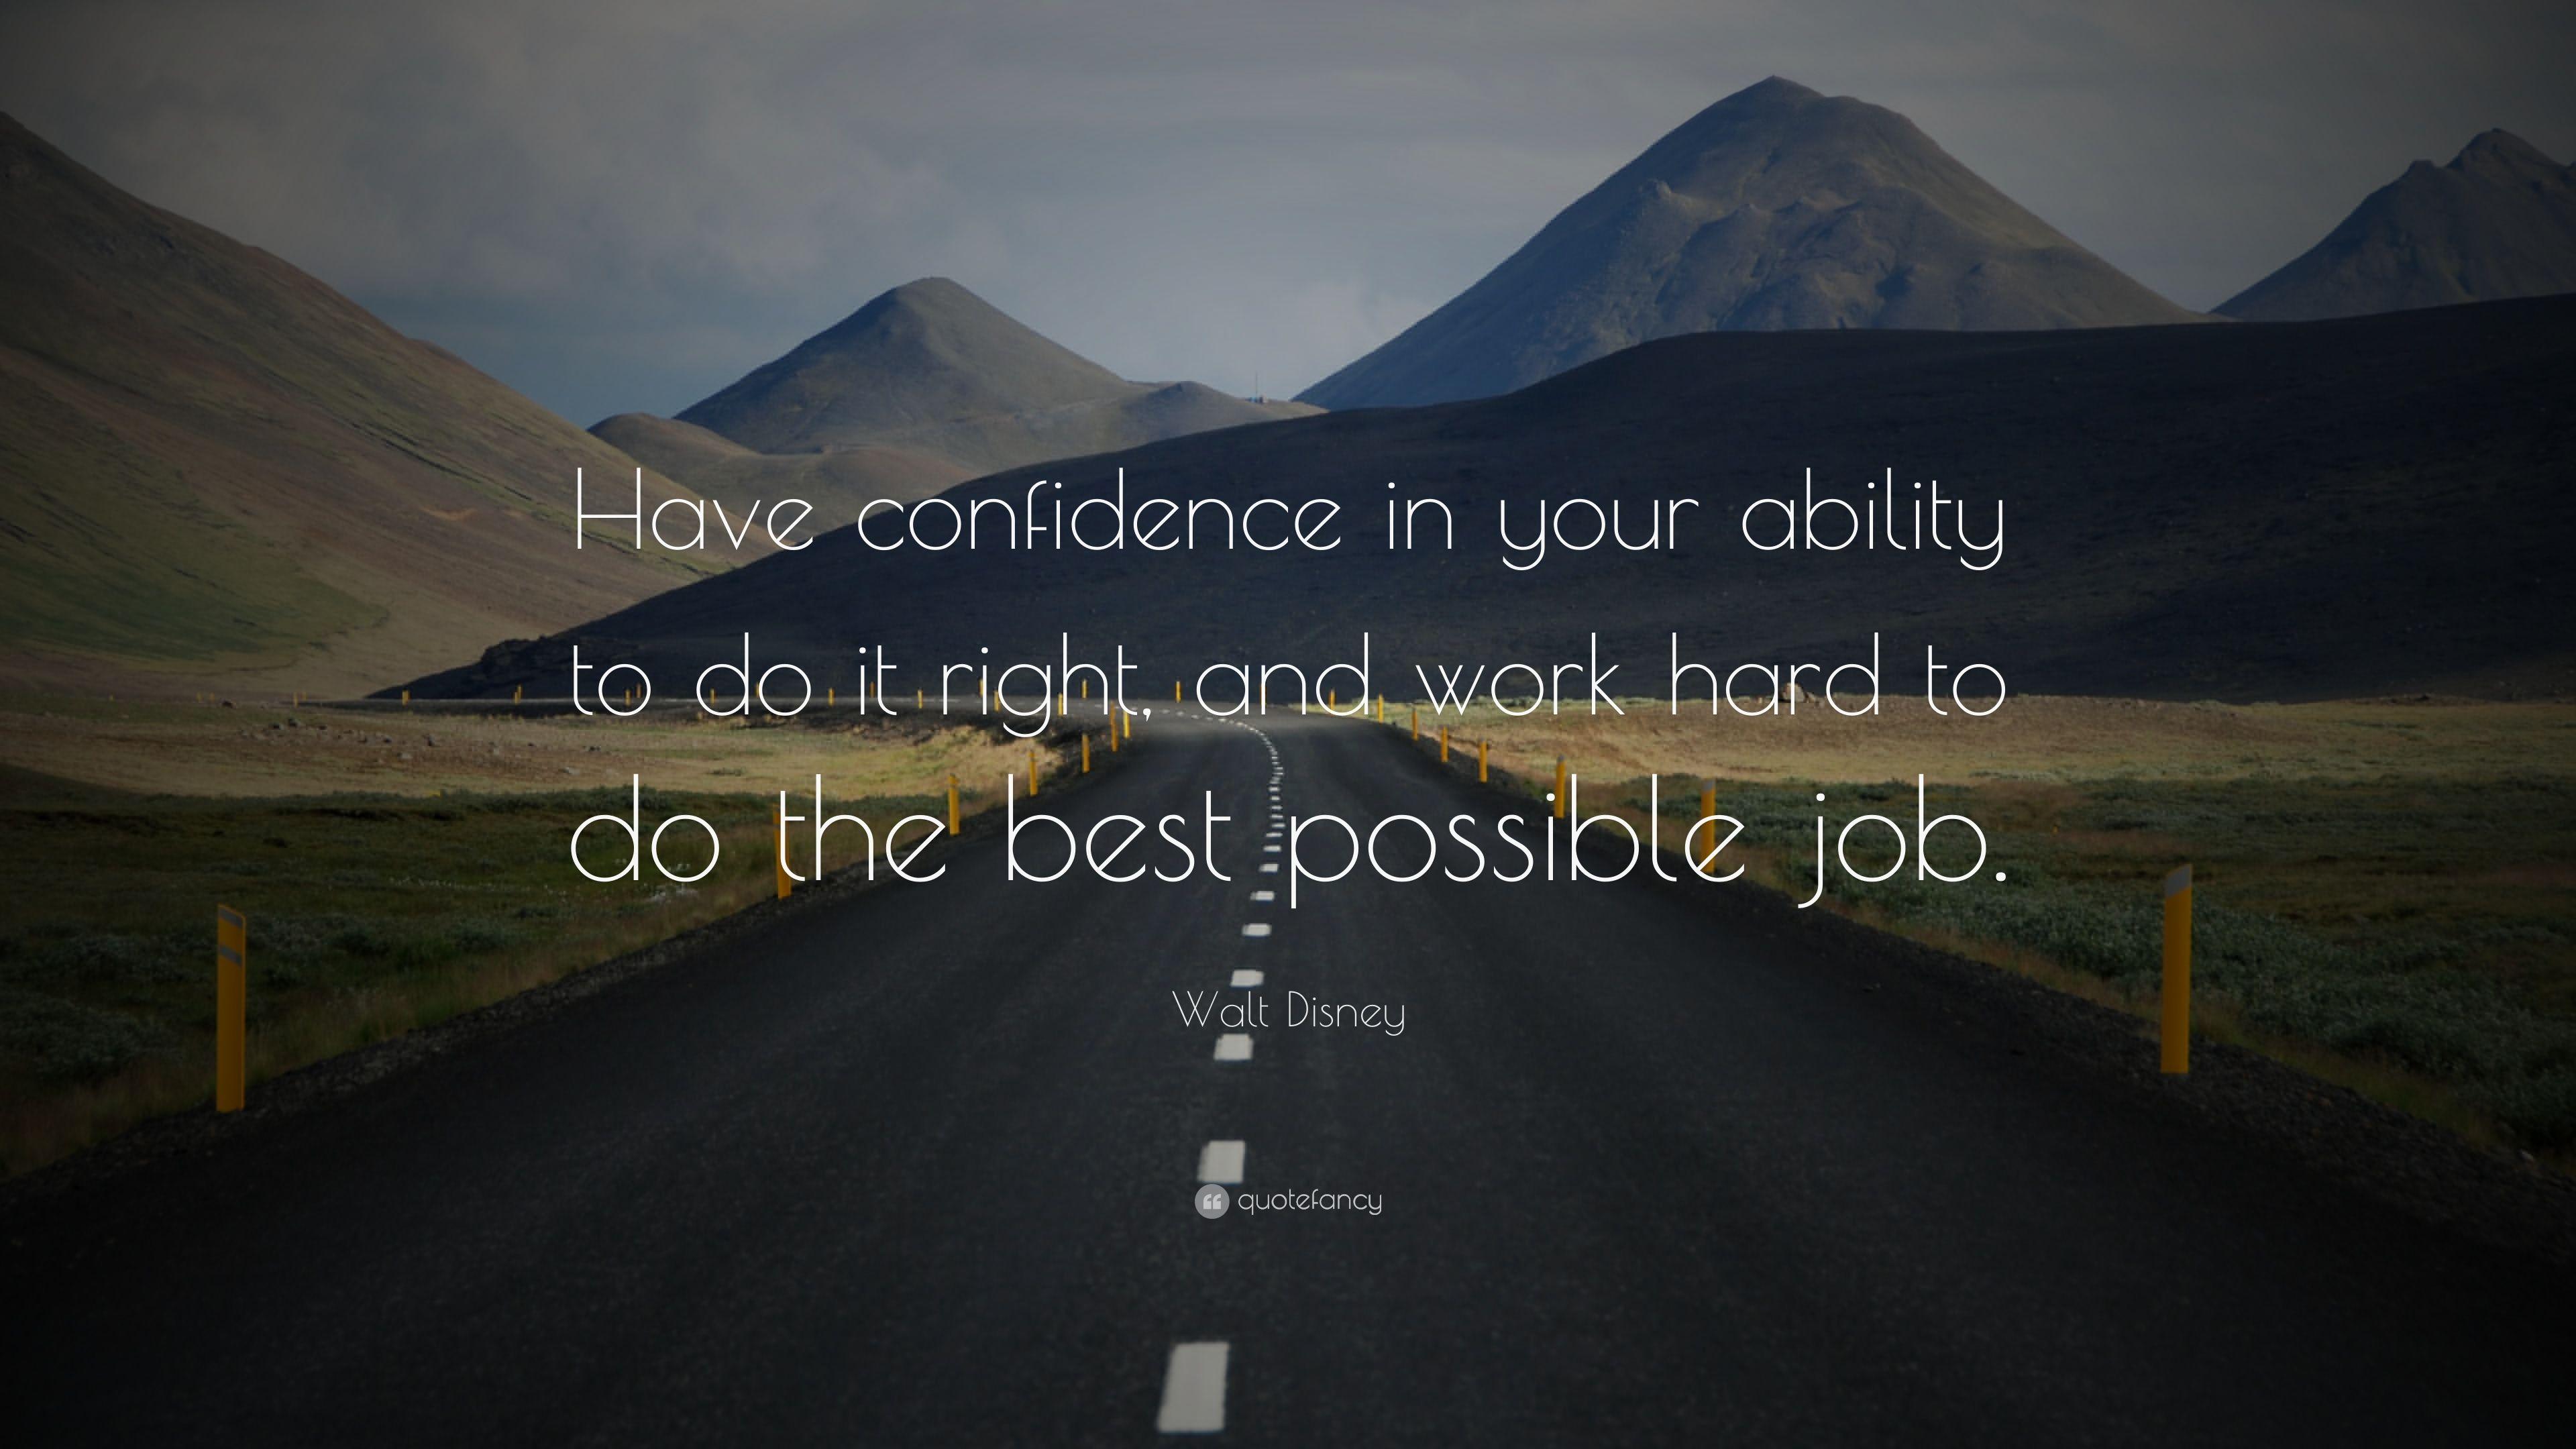 Walt Disney Quote: “Have confidence in your ability to do it right